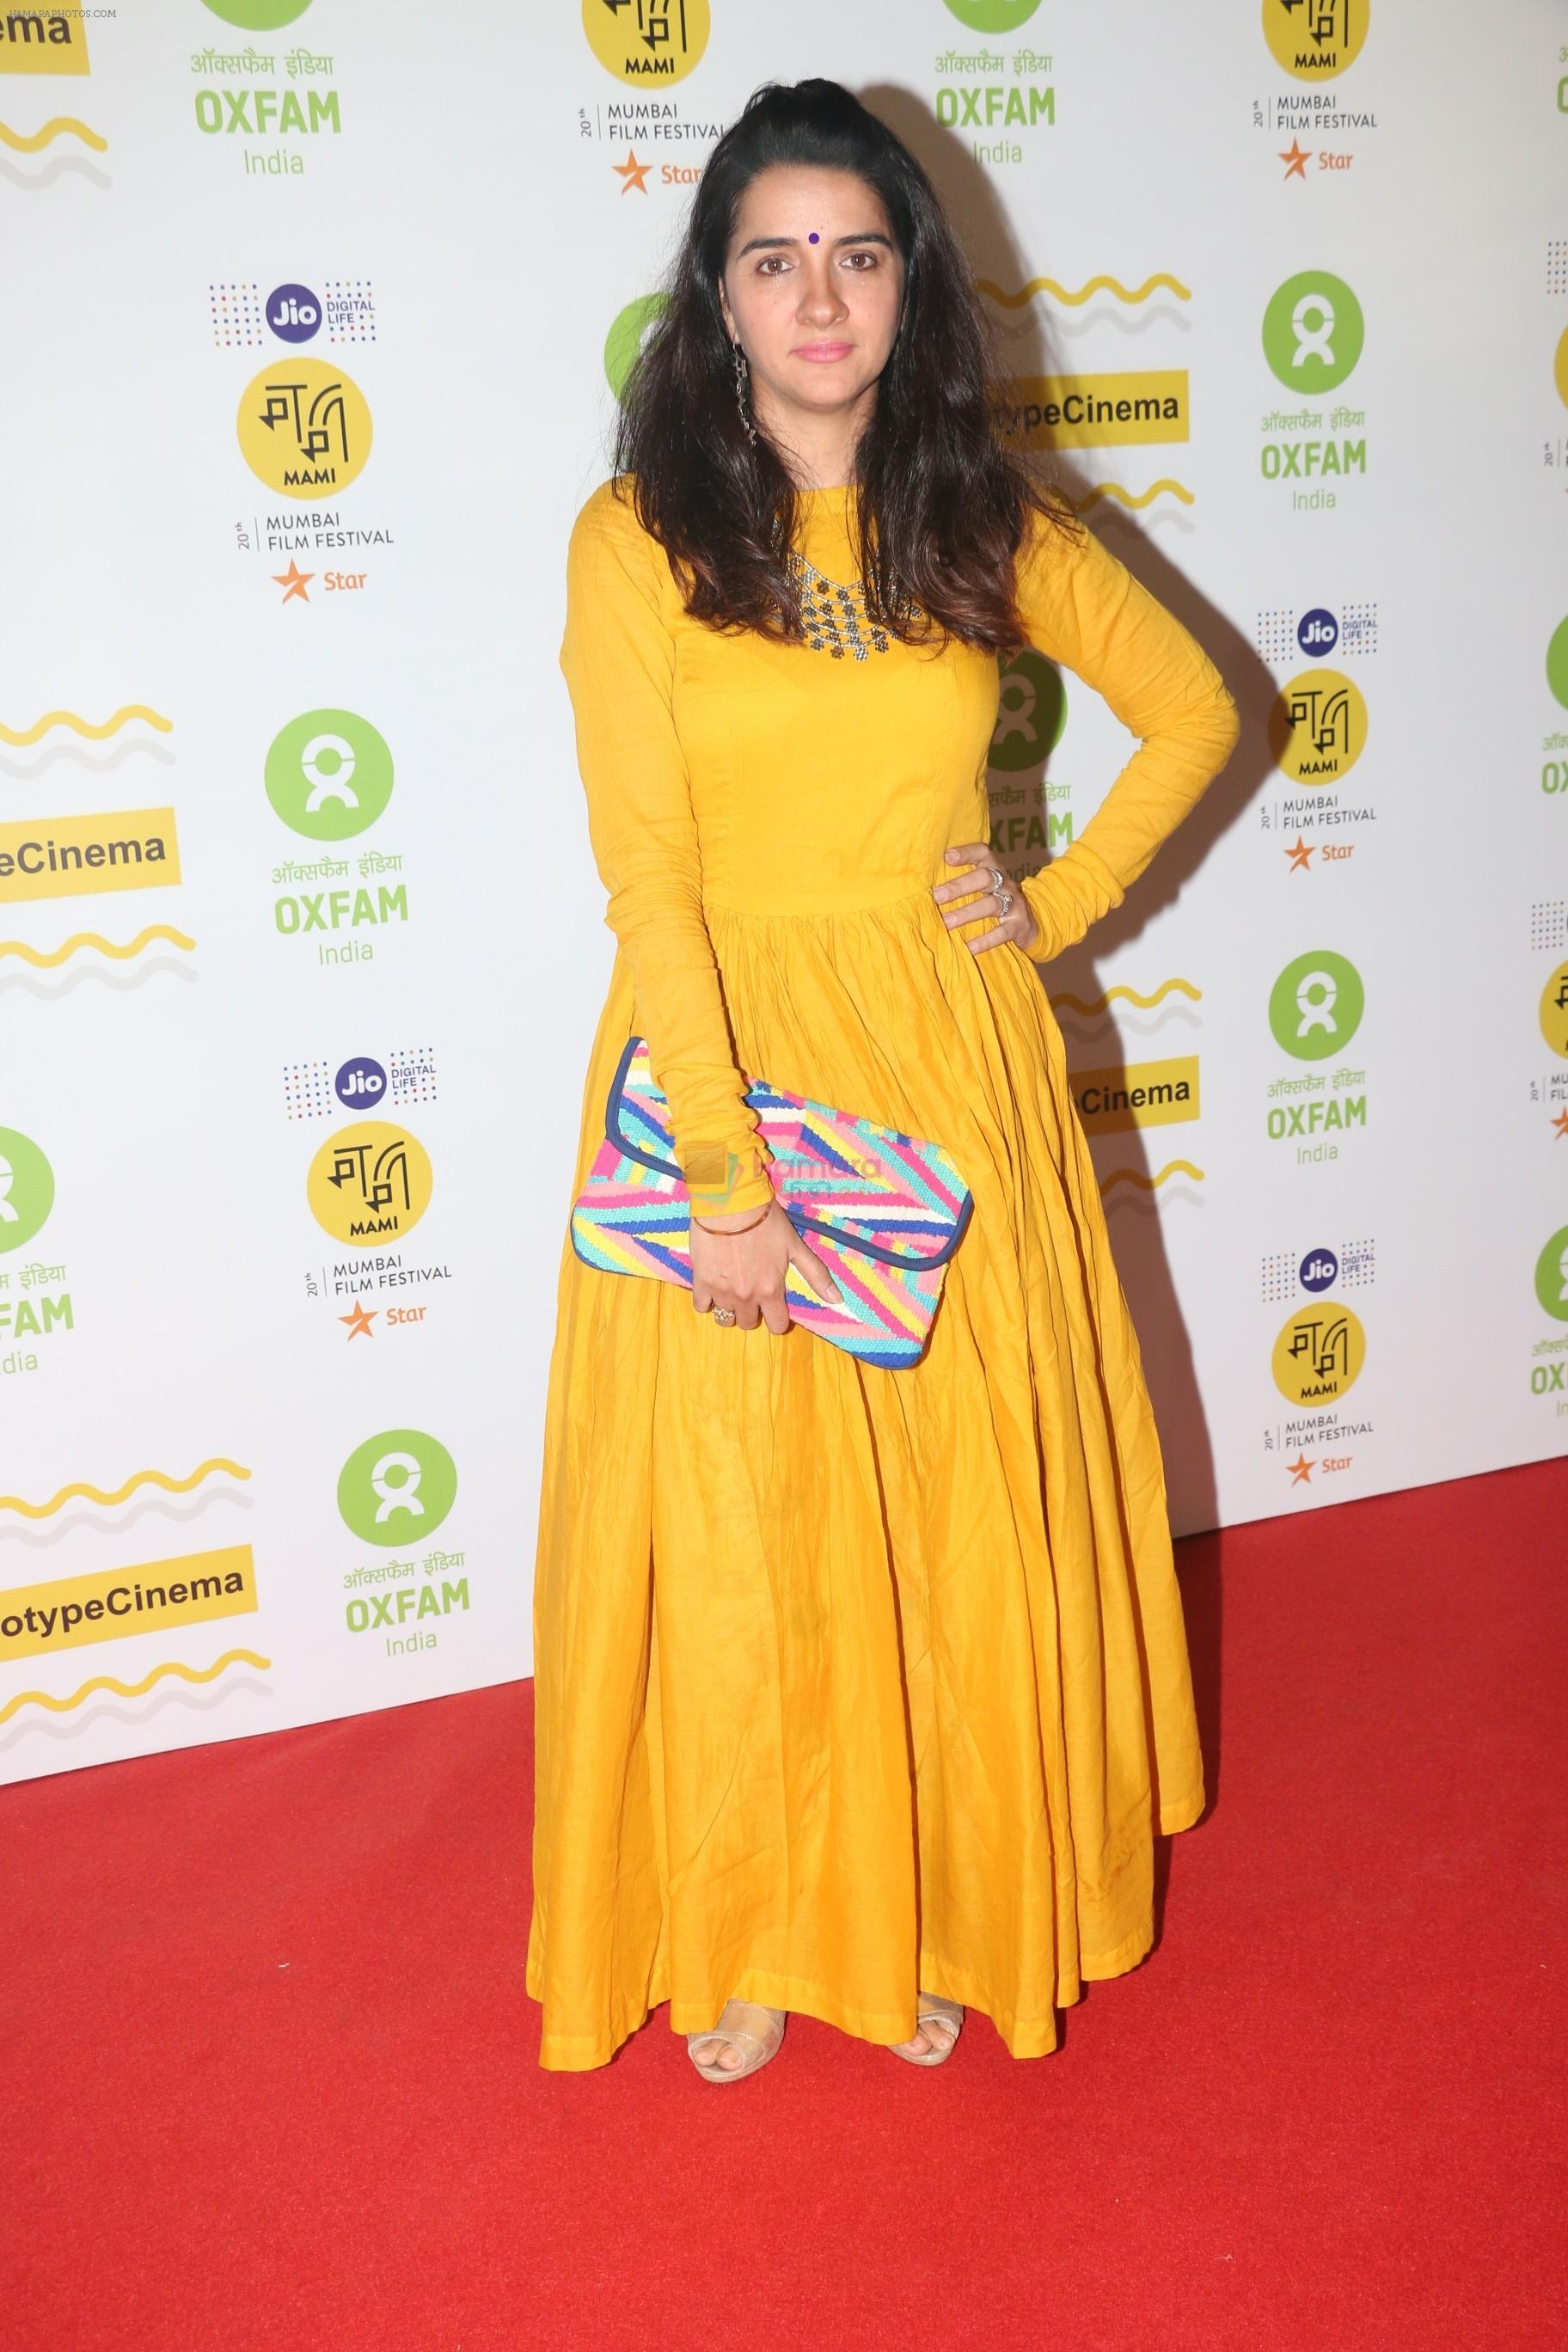 Shruti Seth at the Red Carpet For Oxfam Mami Women In Film Brunch on 28th Oct 2018